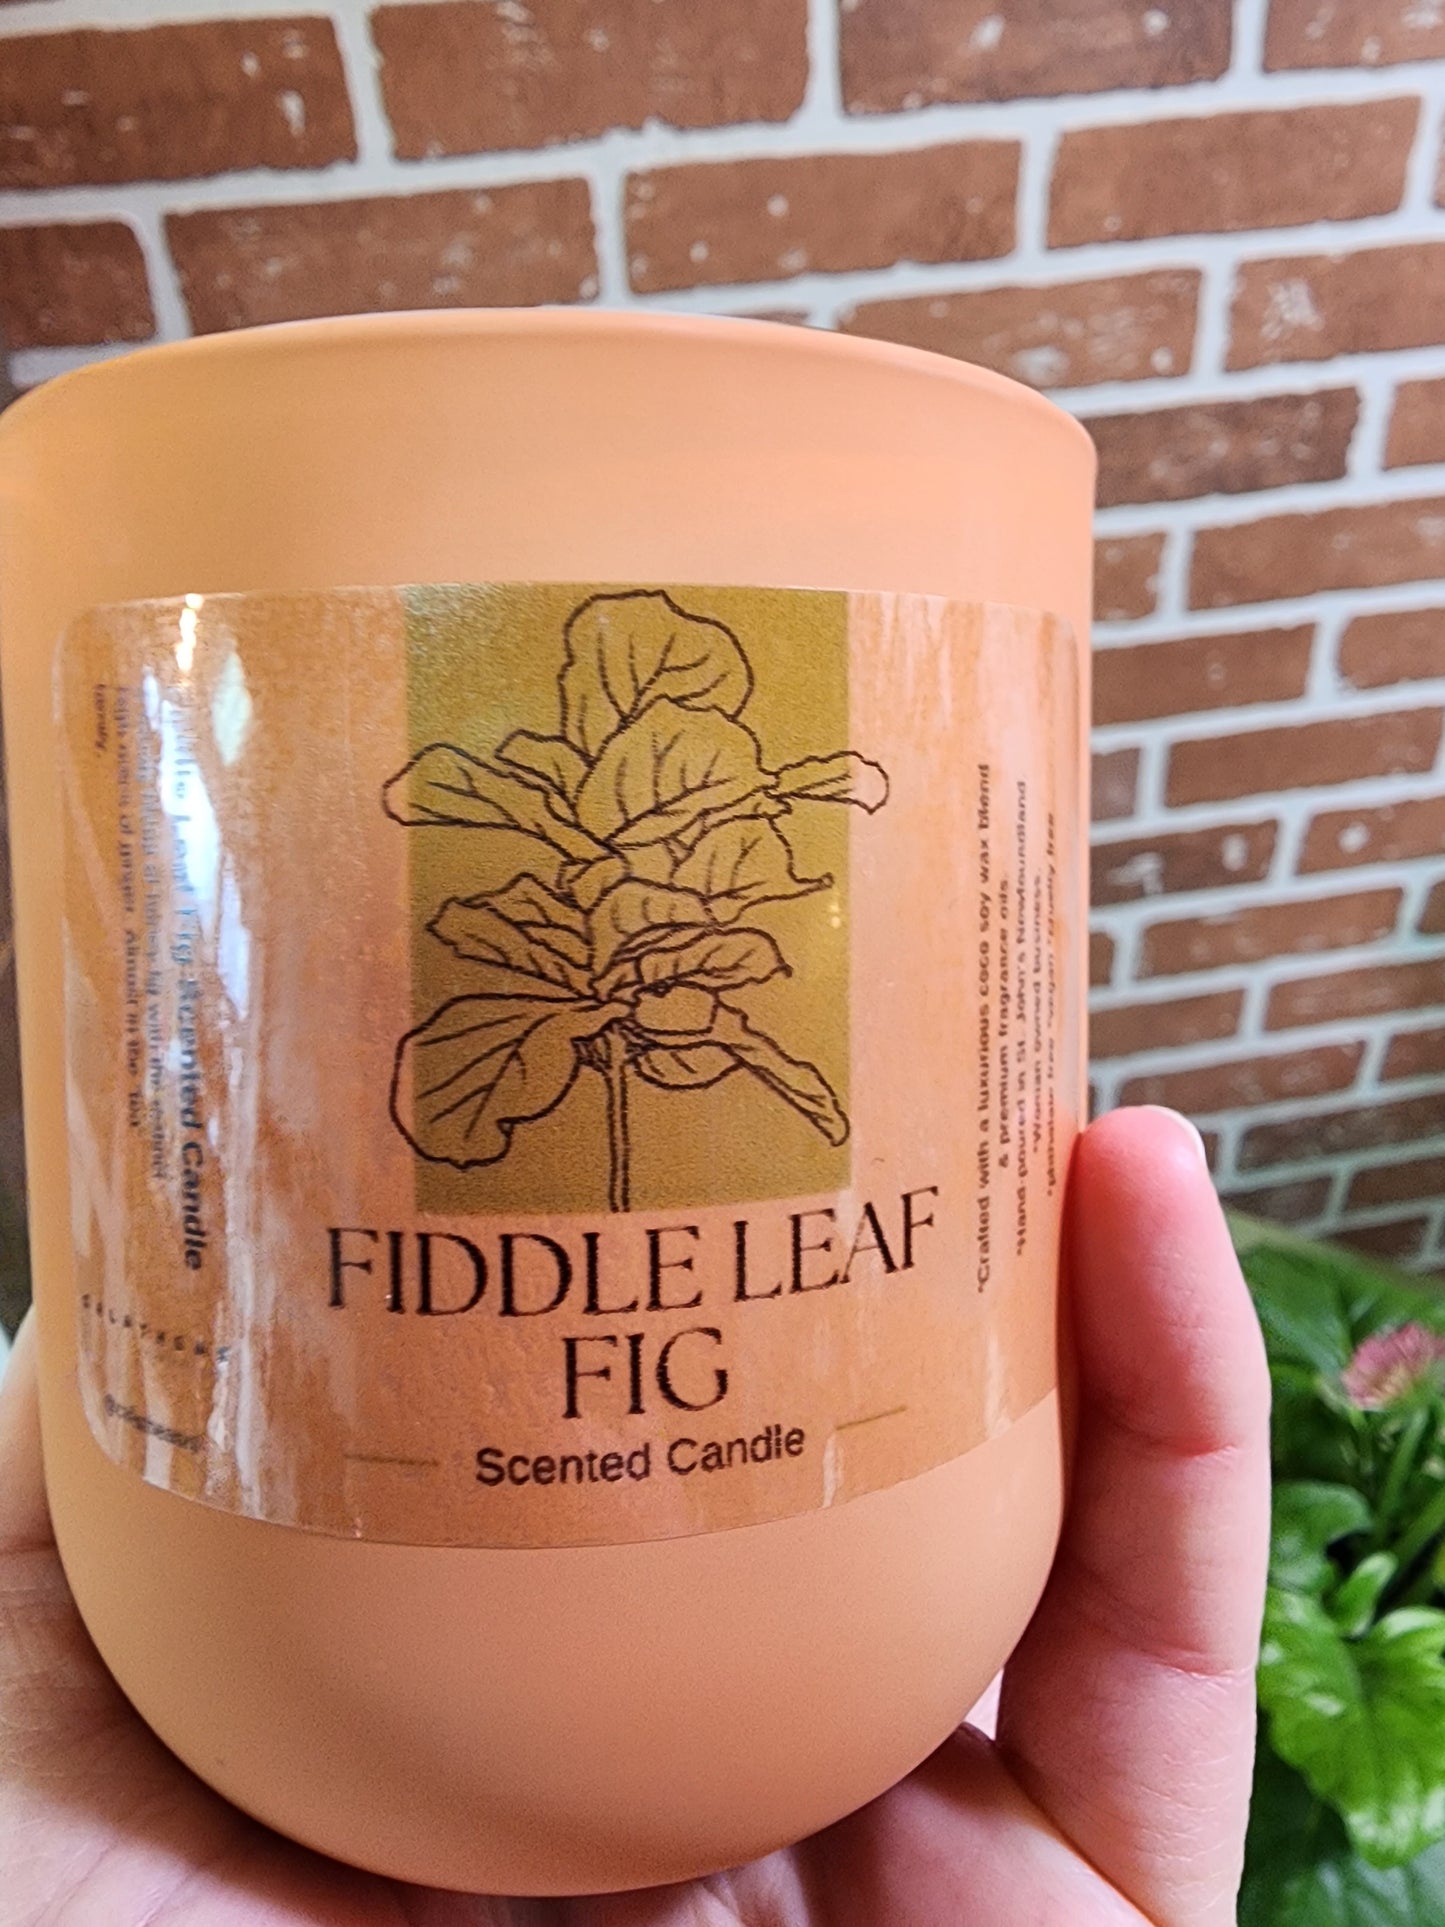 Fiddle Leaf Fig Scented Candle